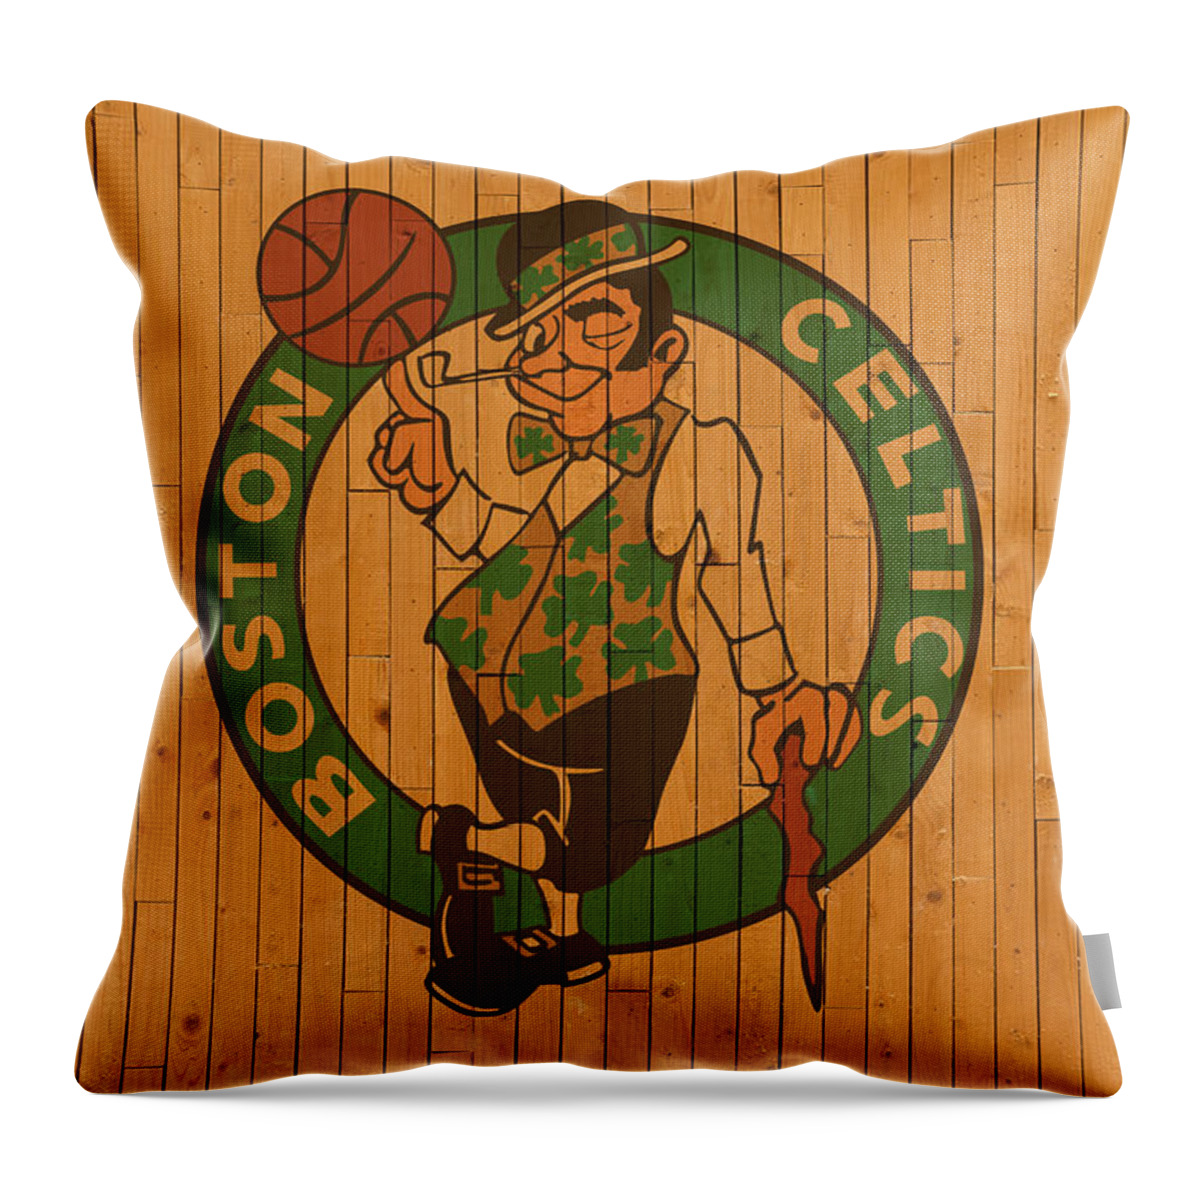 Old Throw Pillow featuring the mixed media Old Boston Celtics Basketball Gym Floor by Design Turnpike